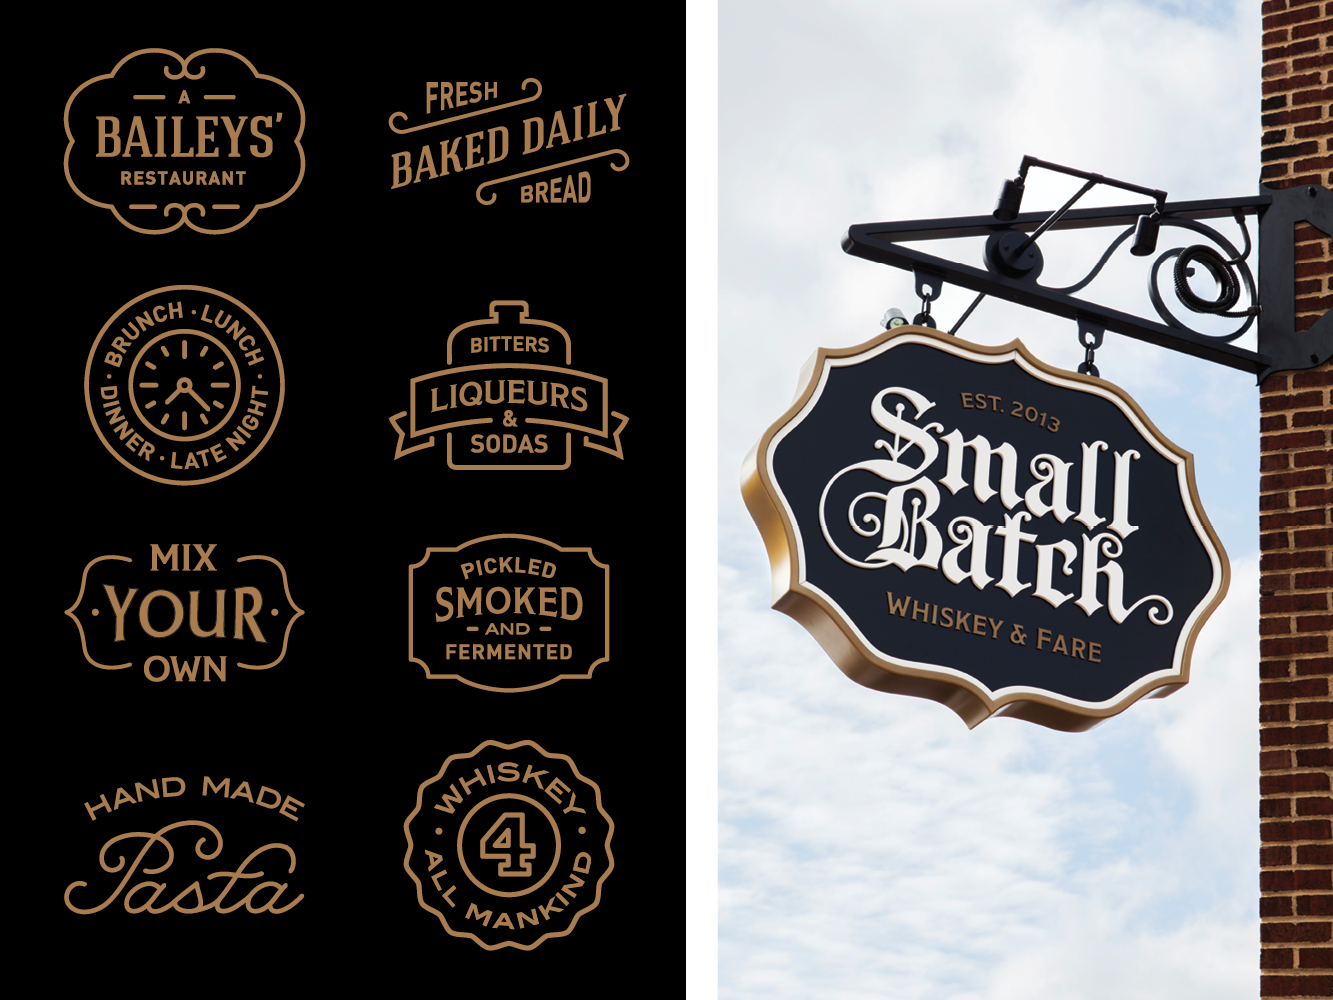 Two images showing Small Batch brand marks and exterior signage